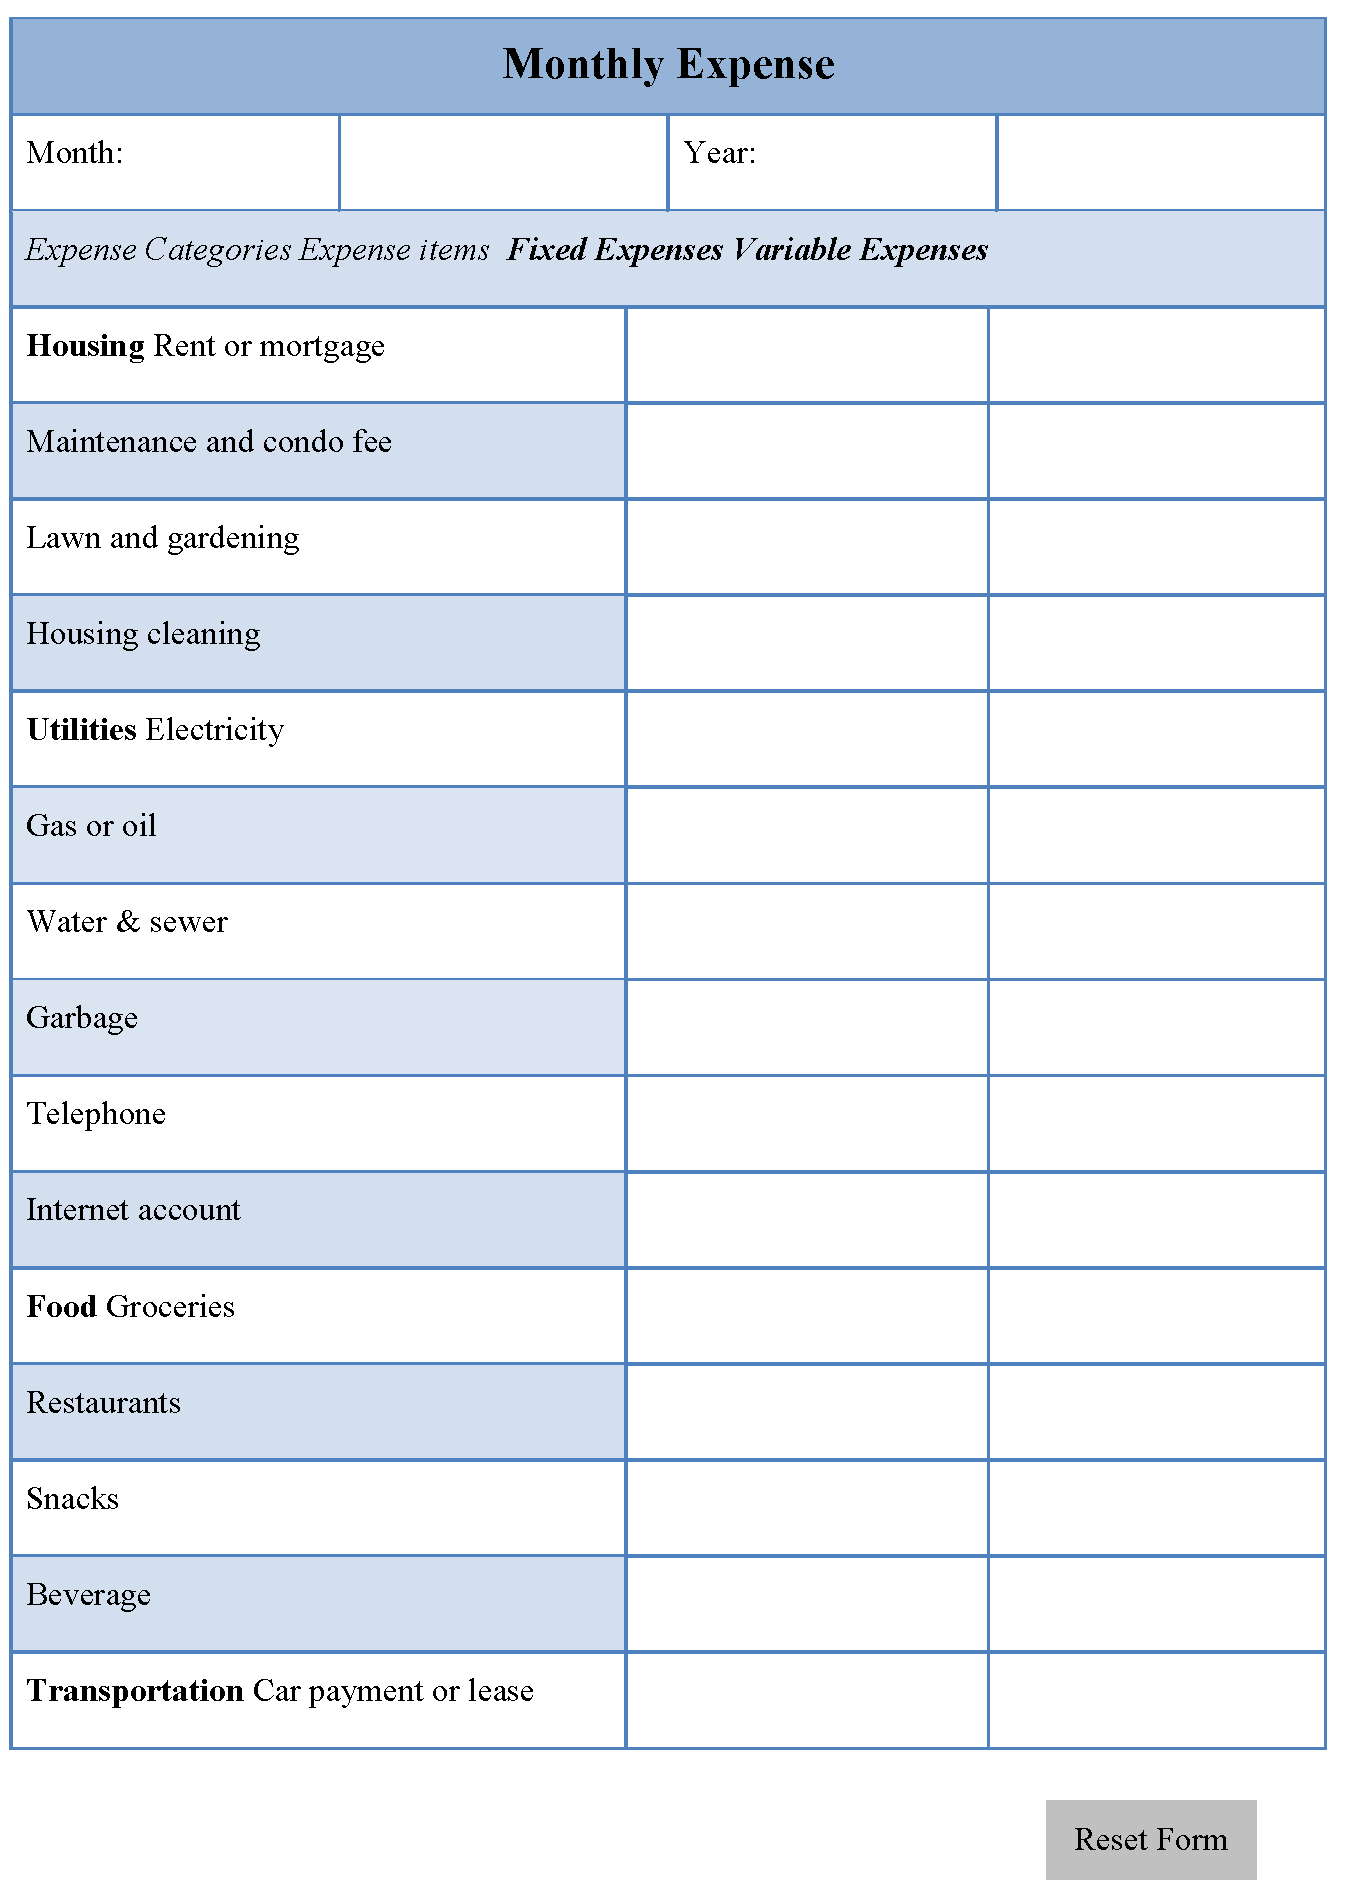 Monthly Expense Form Editable Forms